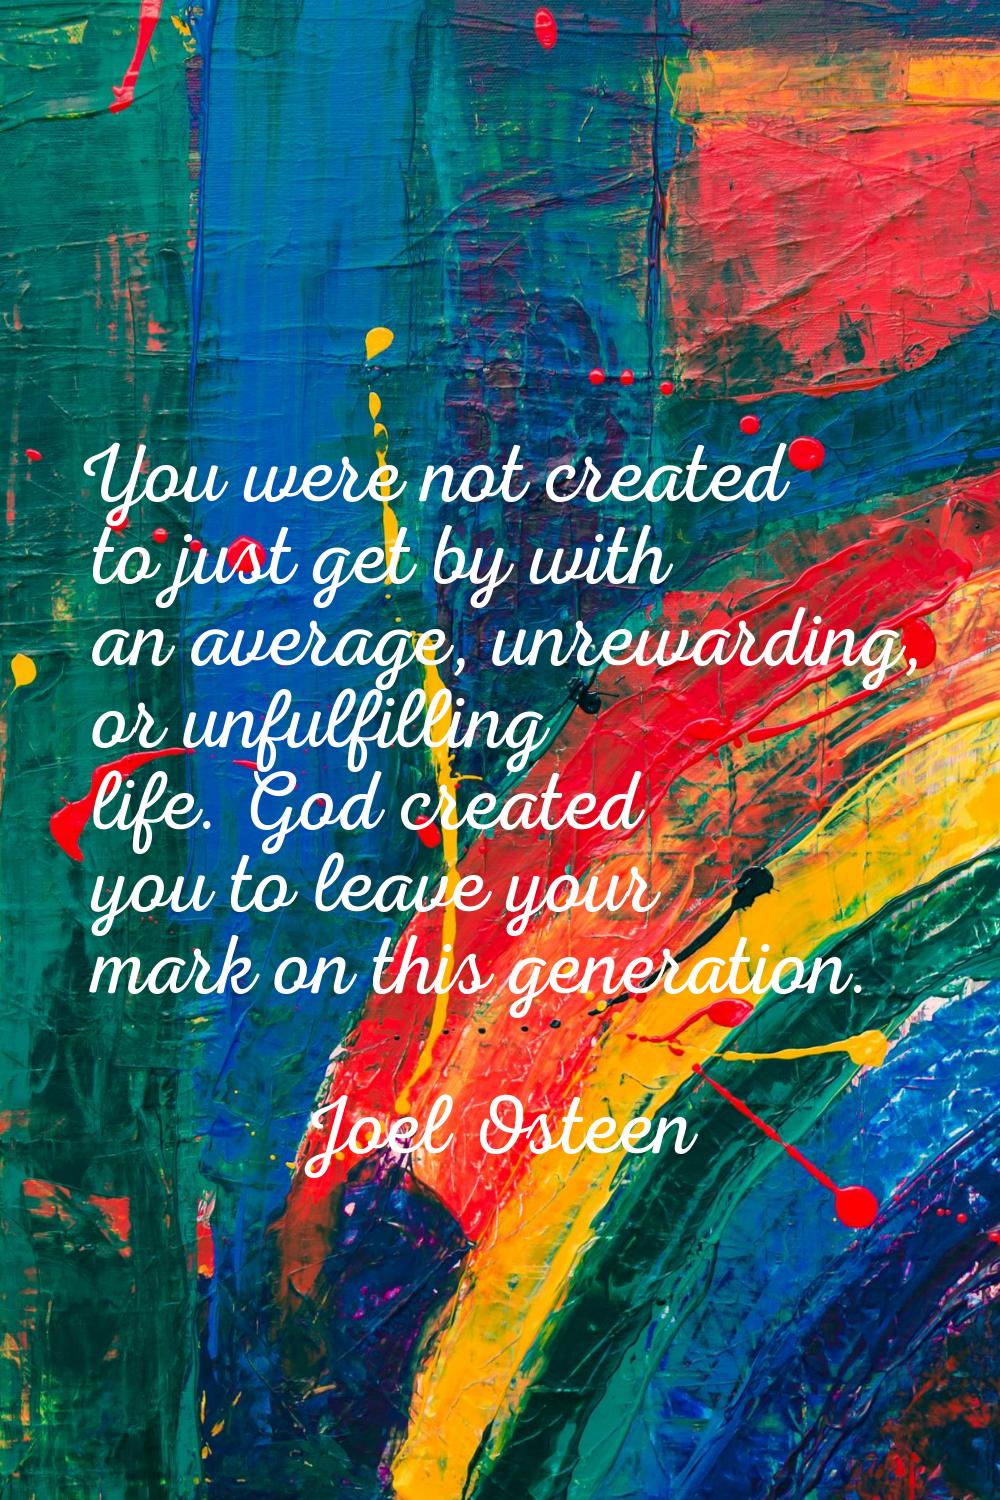 You were not created to just get by with an average, unrewarding, or unfulfilling life. God created